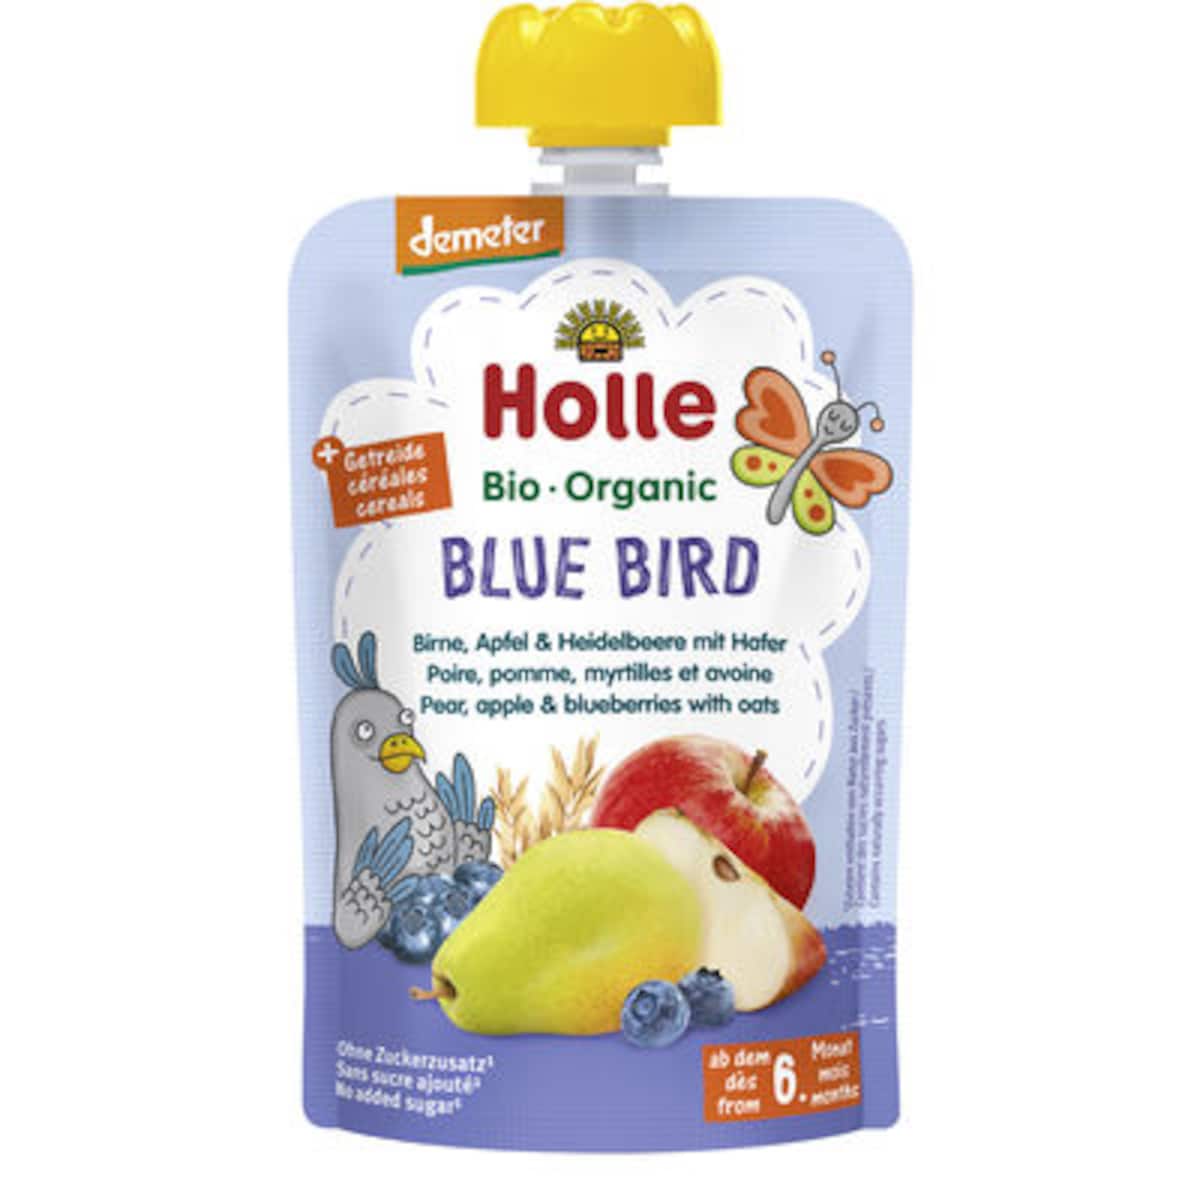 Holle Organic Pouch Blue Bird Pear Apple & Blueberries With Oats 100G